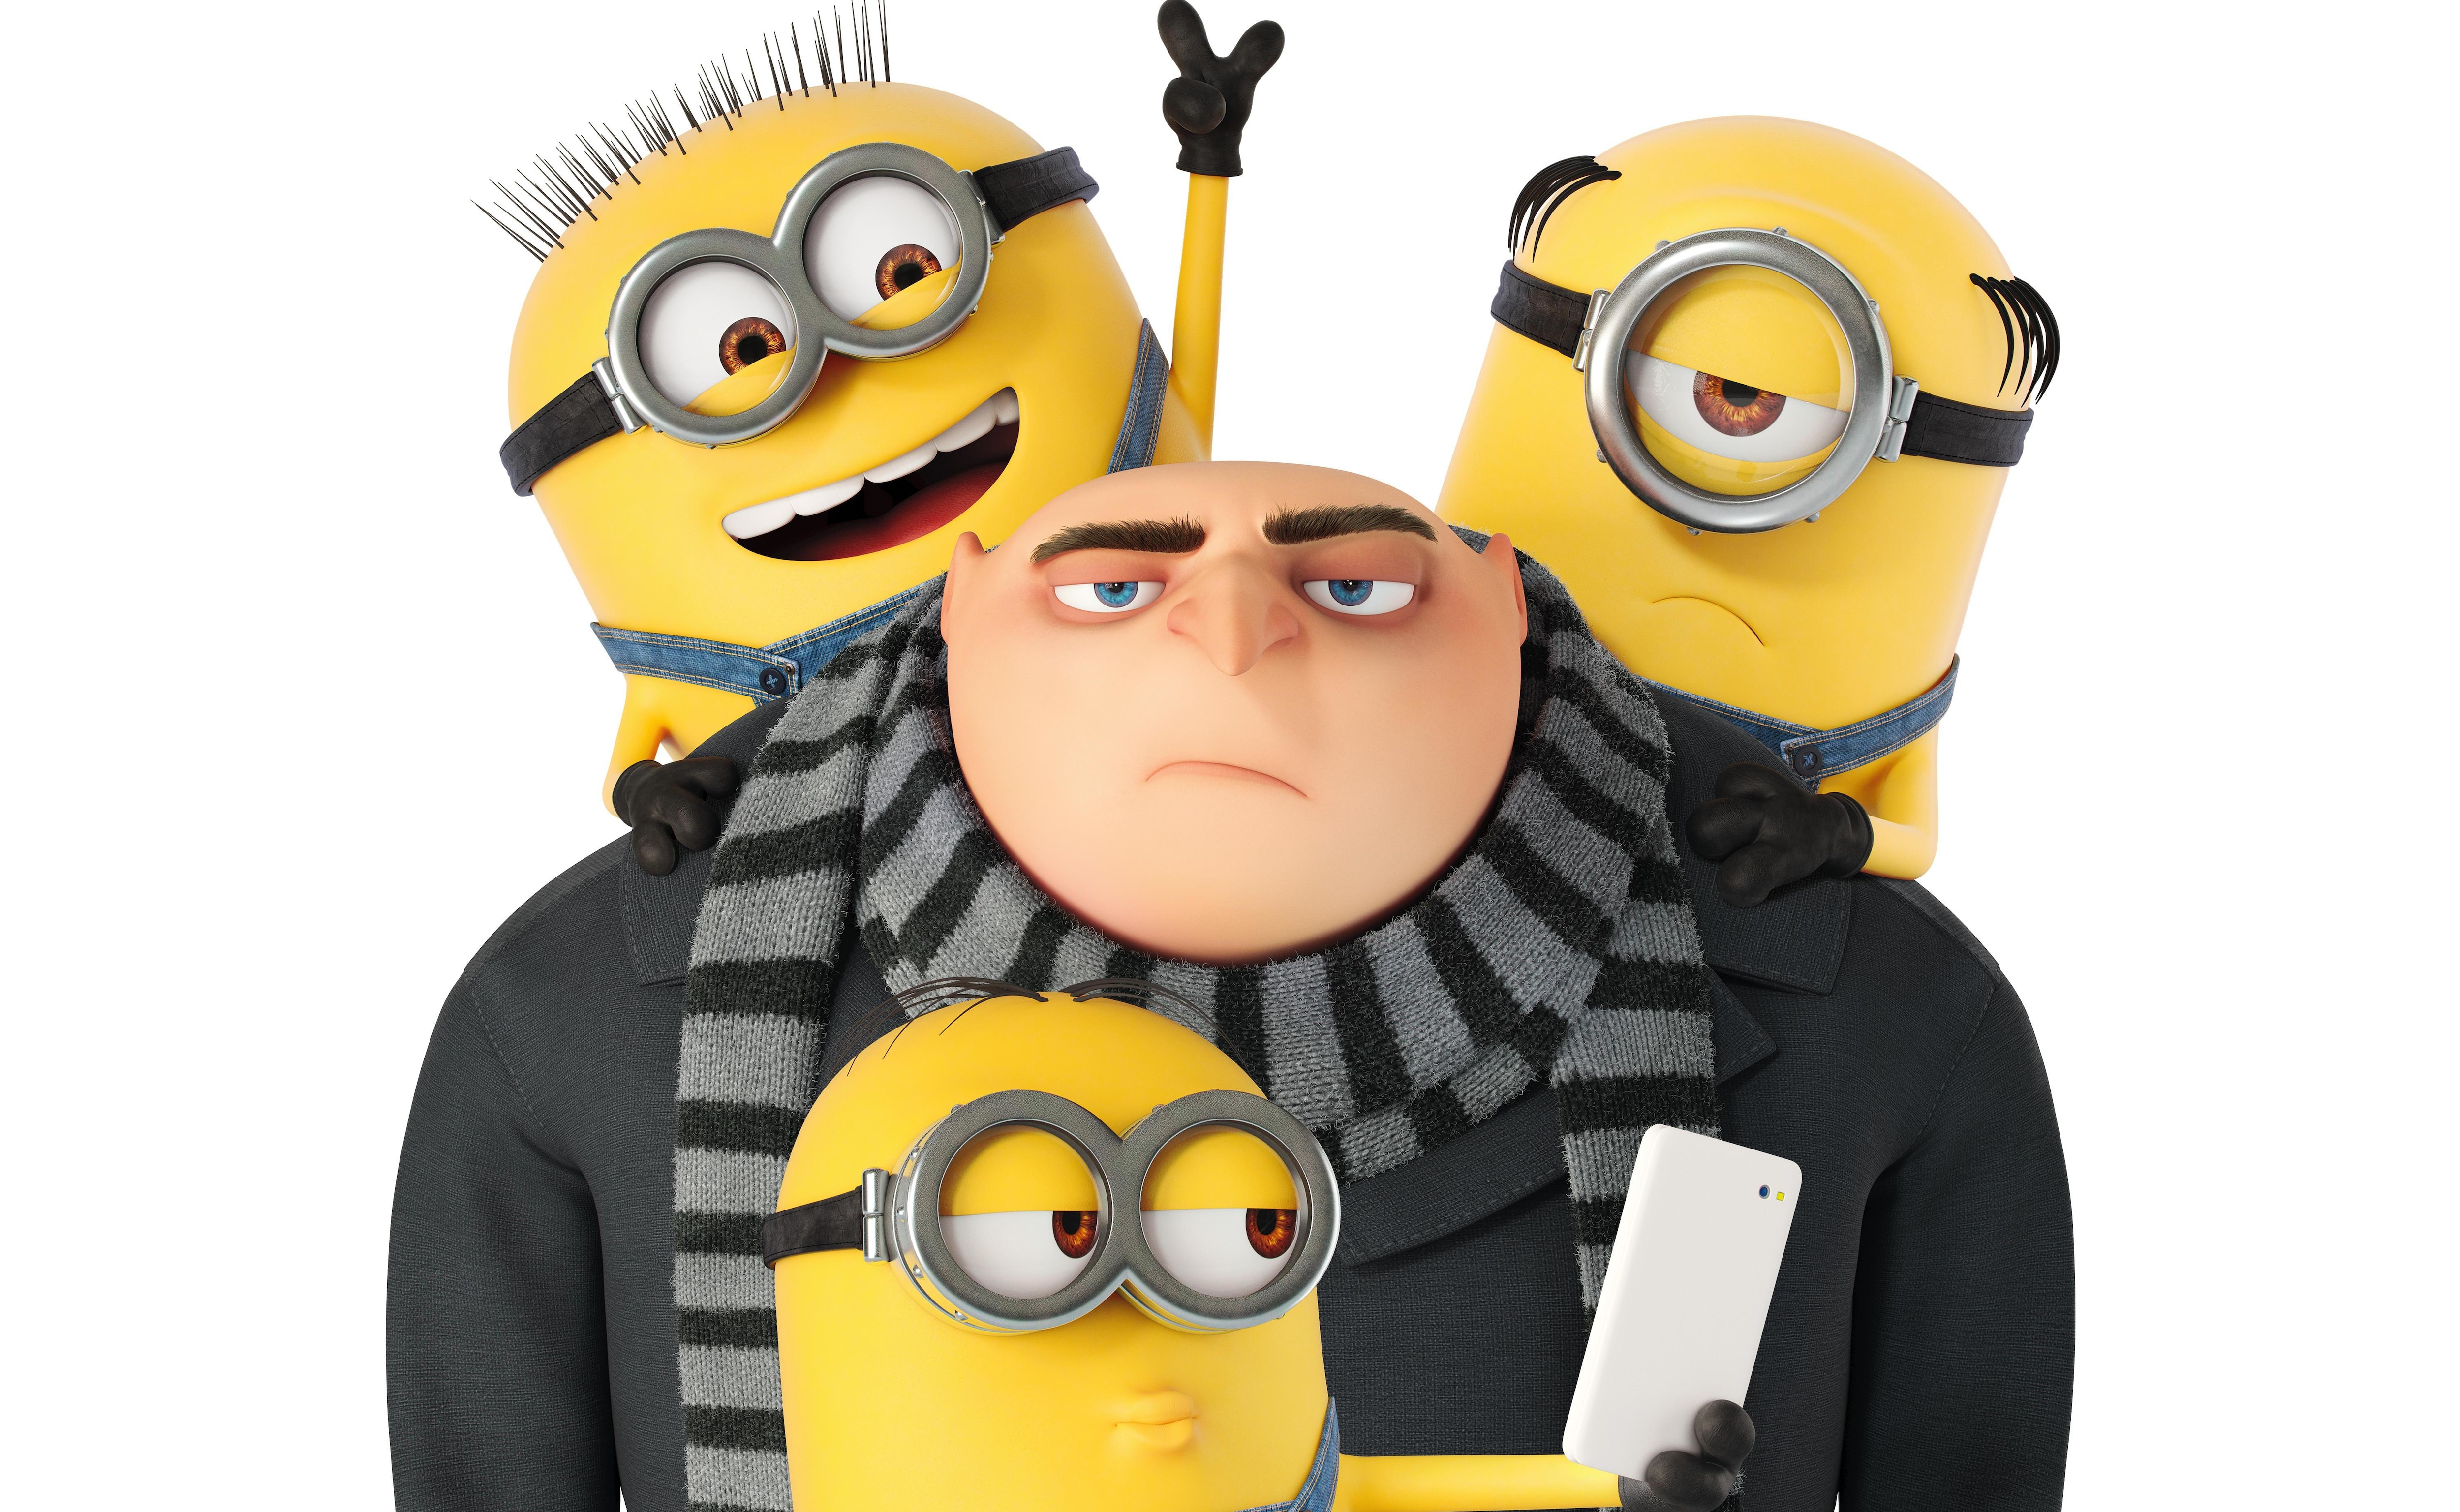 Wallpapers animated films Despicable me 3 minions 2017 on the desktop